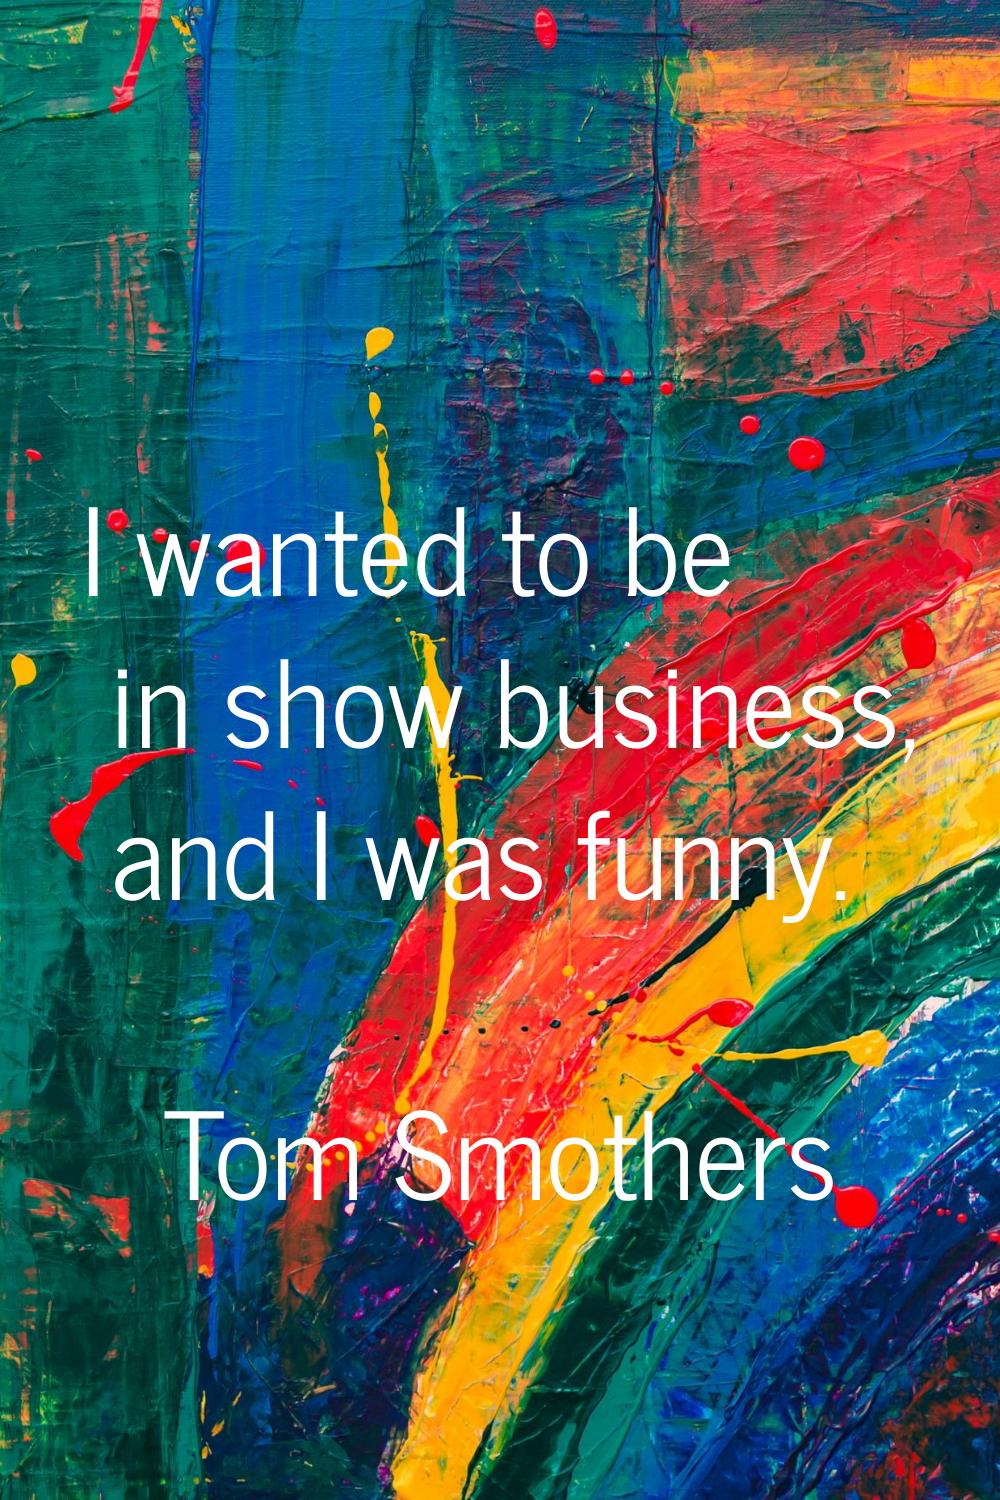 I wanted to be in show business, and I was funny.